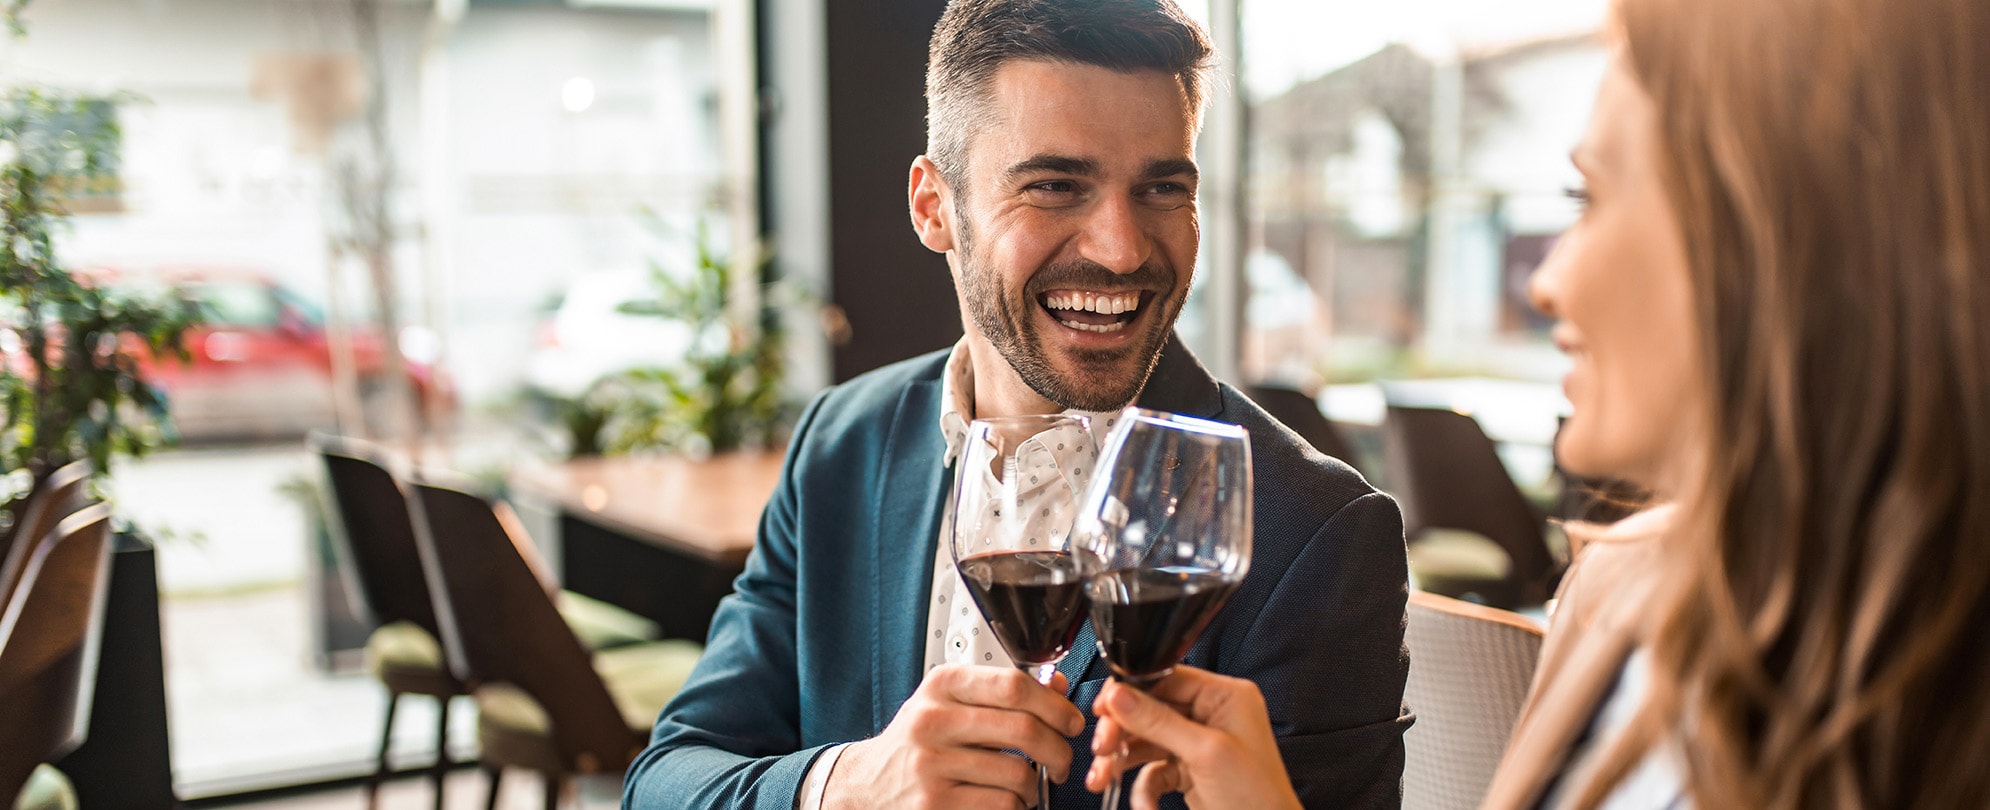 A man smiles at a woman as they clink glasses of red wine while sitting in a restaurant.